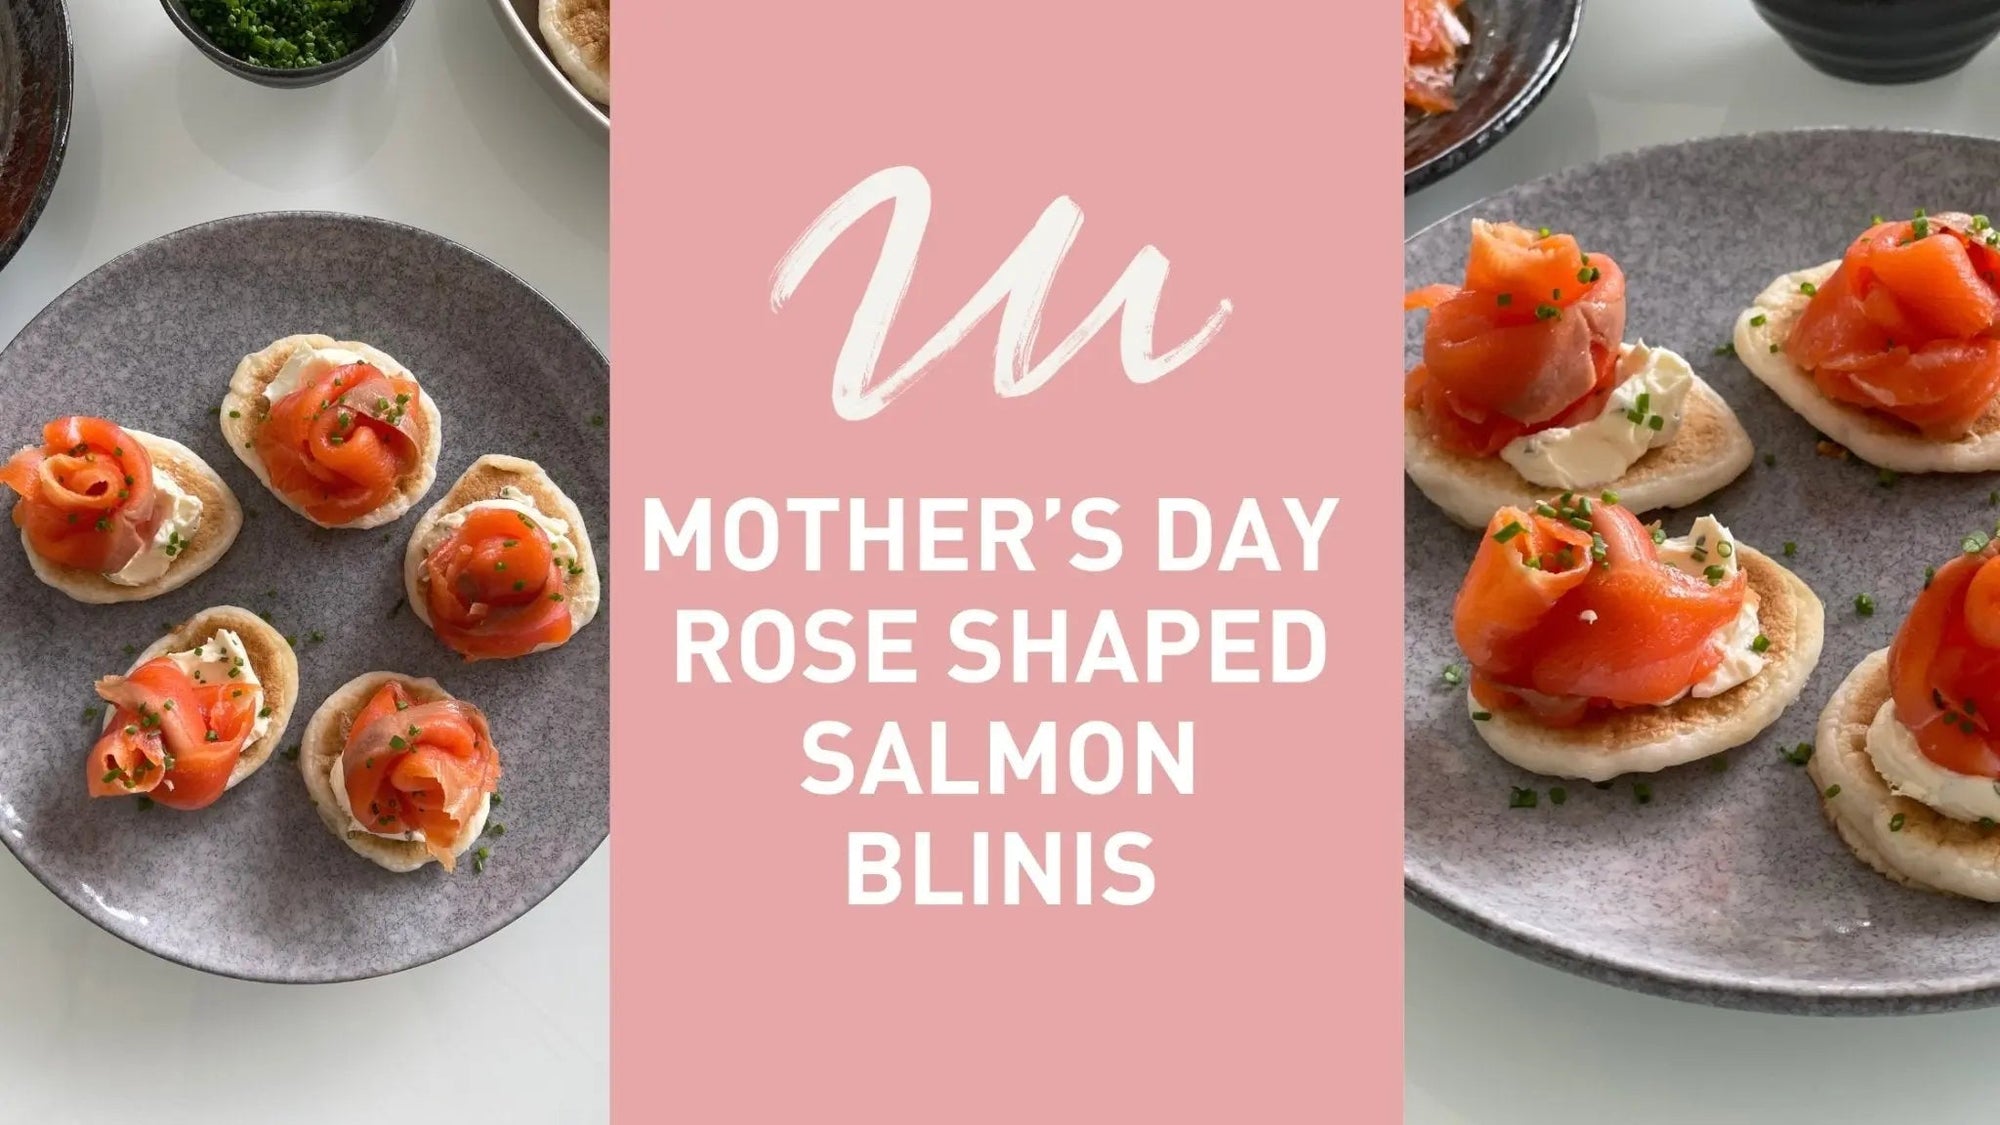 Mother’s Day Rose Shaped Salmon Blinis - Millon Wines